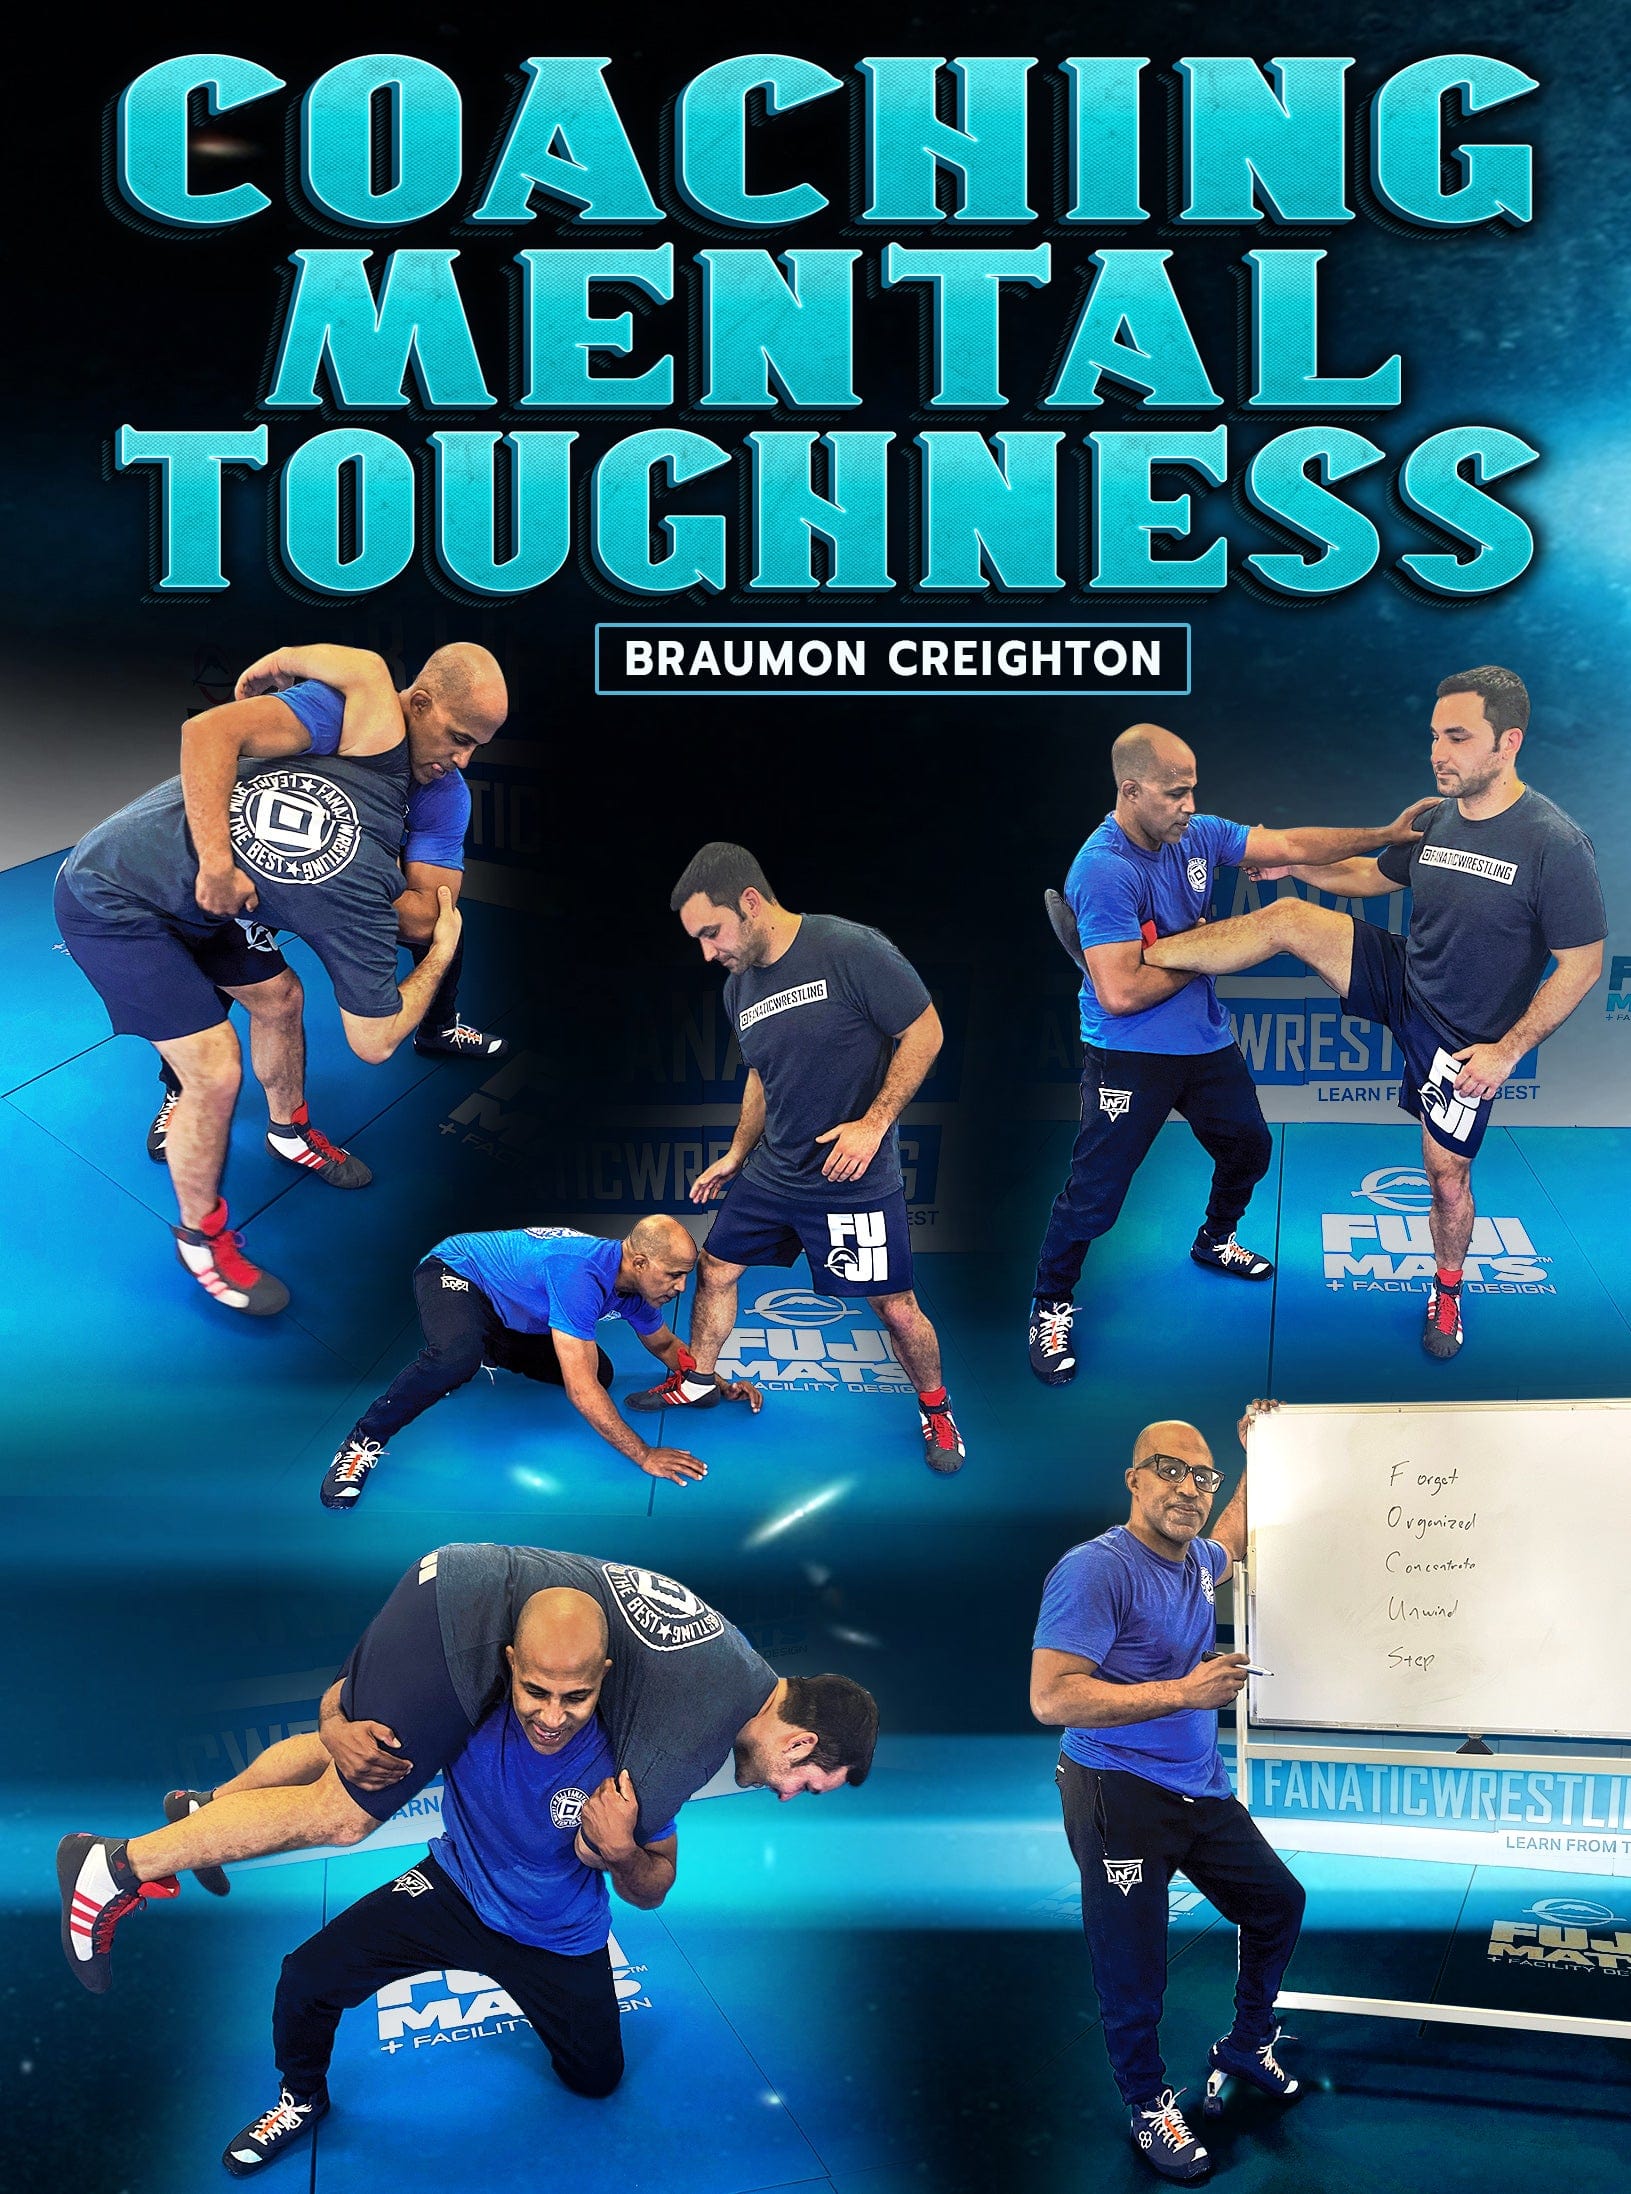 Coaching Mental Toughness by Braumon Creighton - Fanatic Wrestling